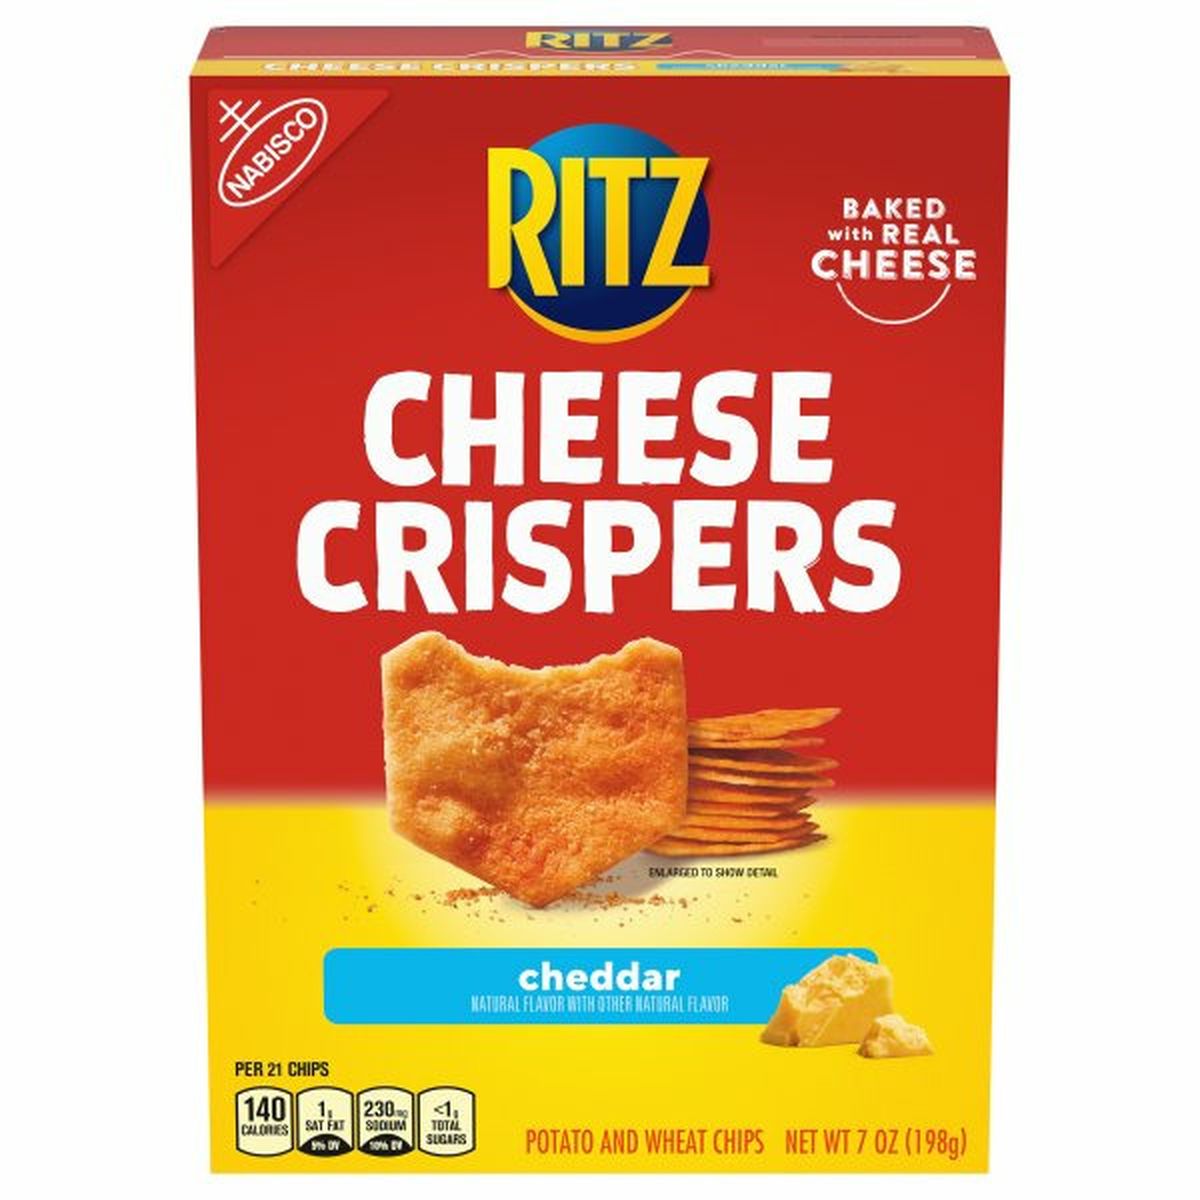 Calories in Ritz Potato and Wheat Chips, Cheddar, Cheese Crispers